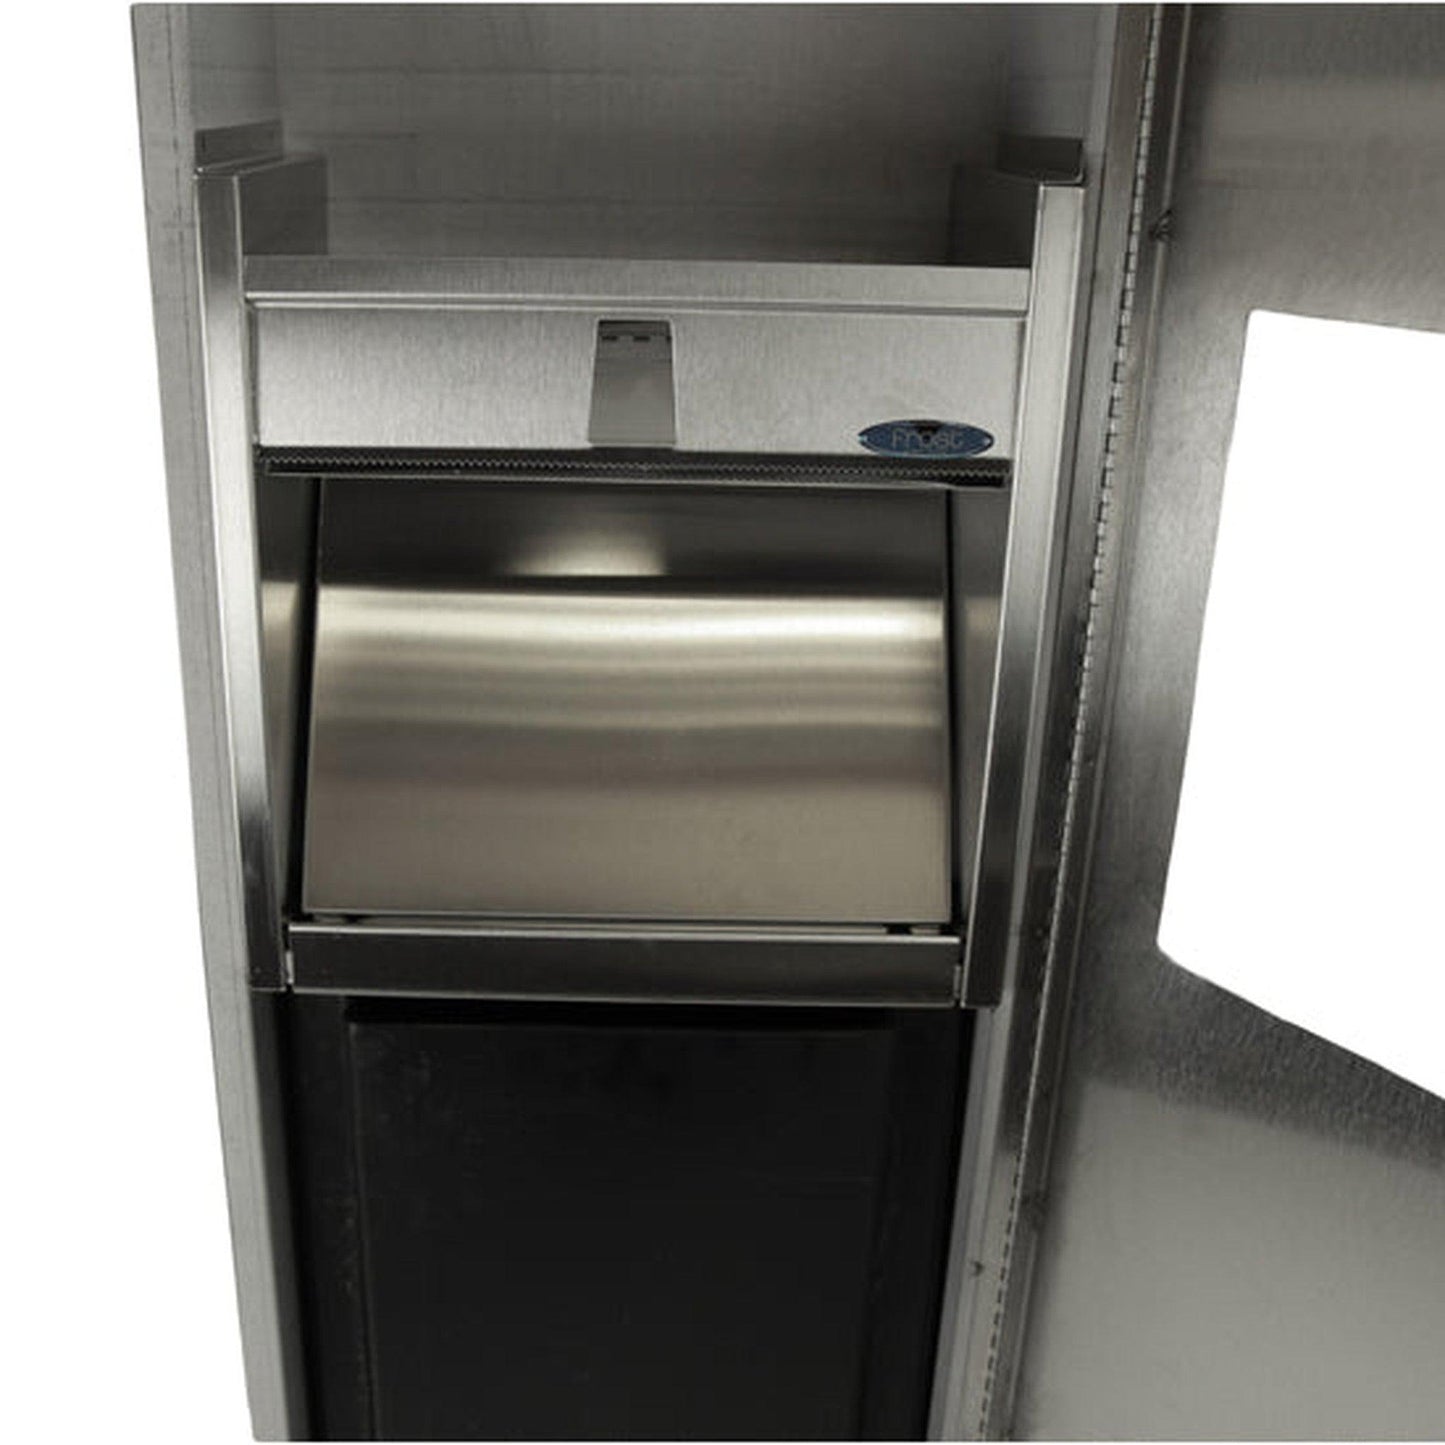 Frost 400-C Wall Mounted Stainless Steel Paper Dispenser and Disposal